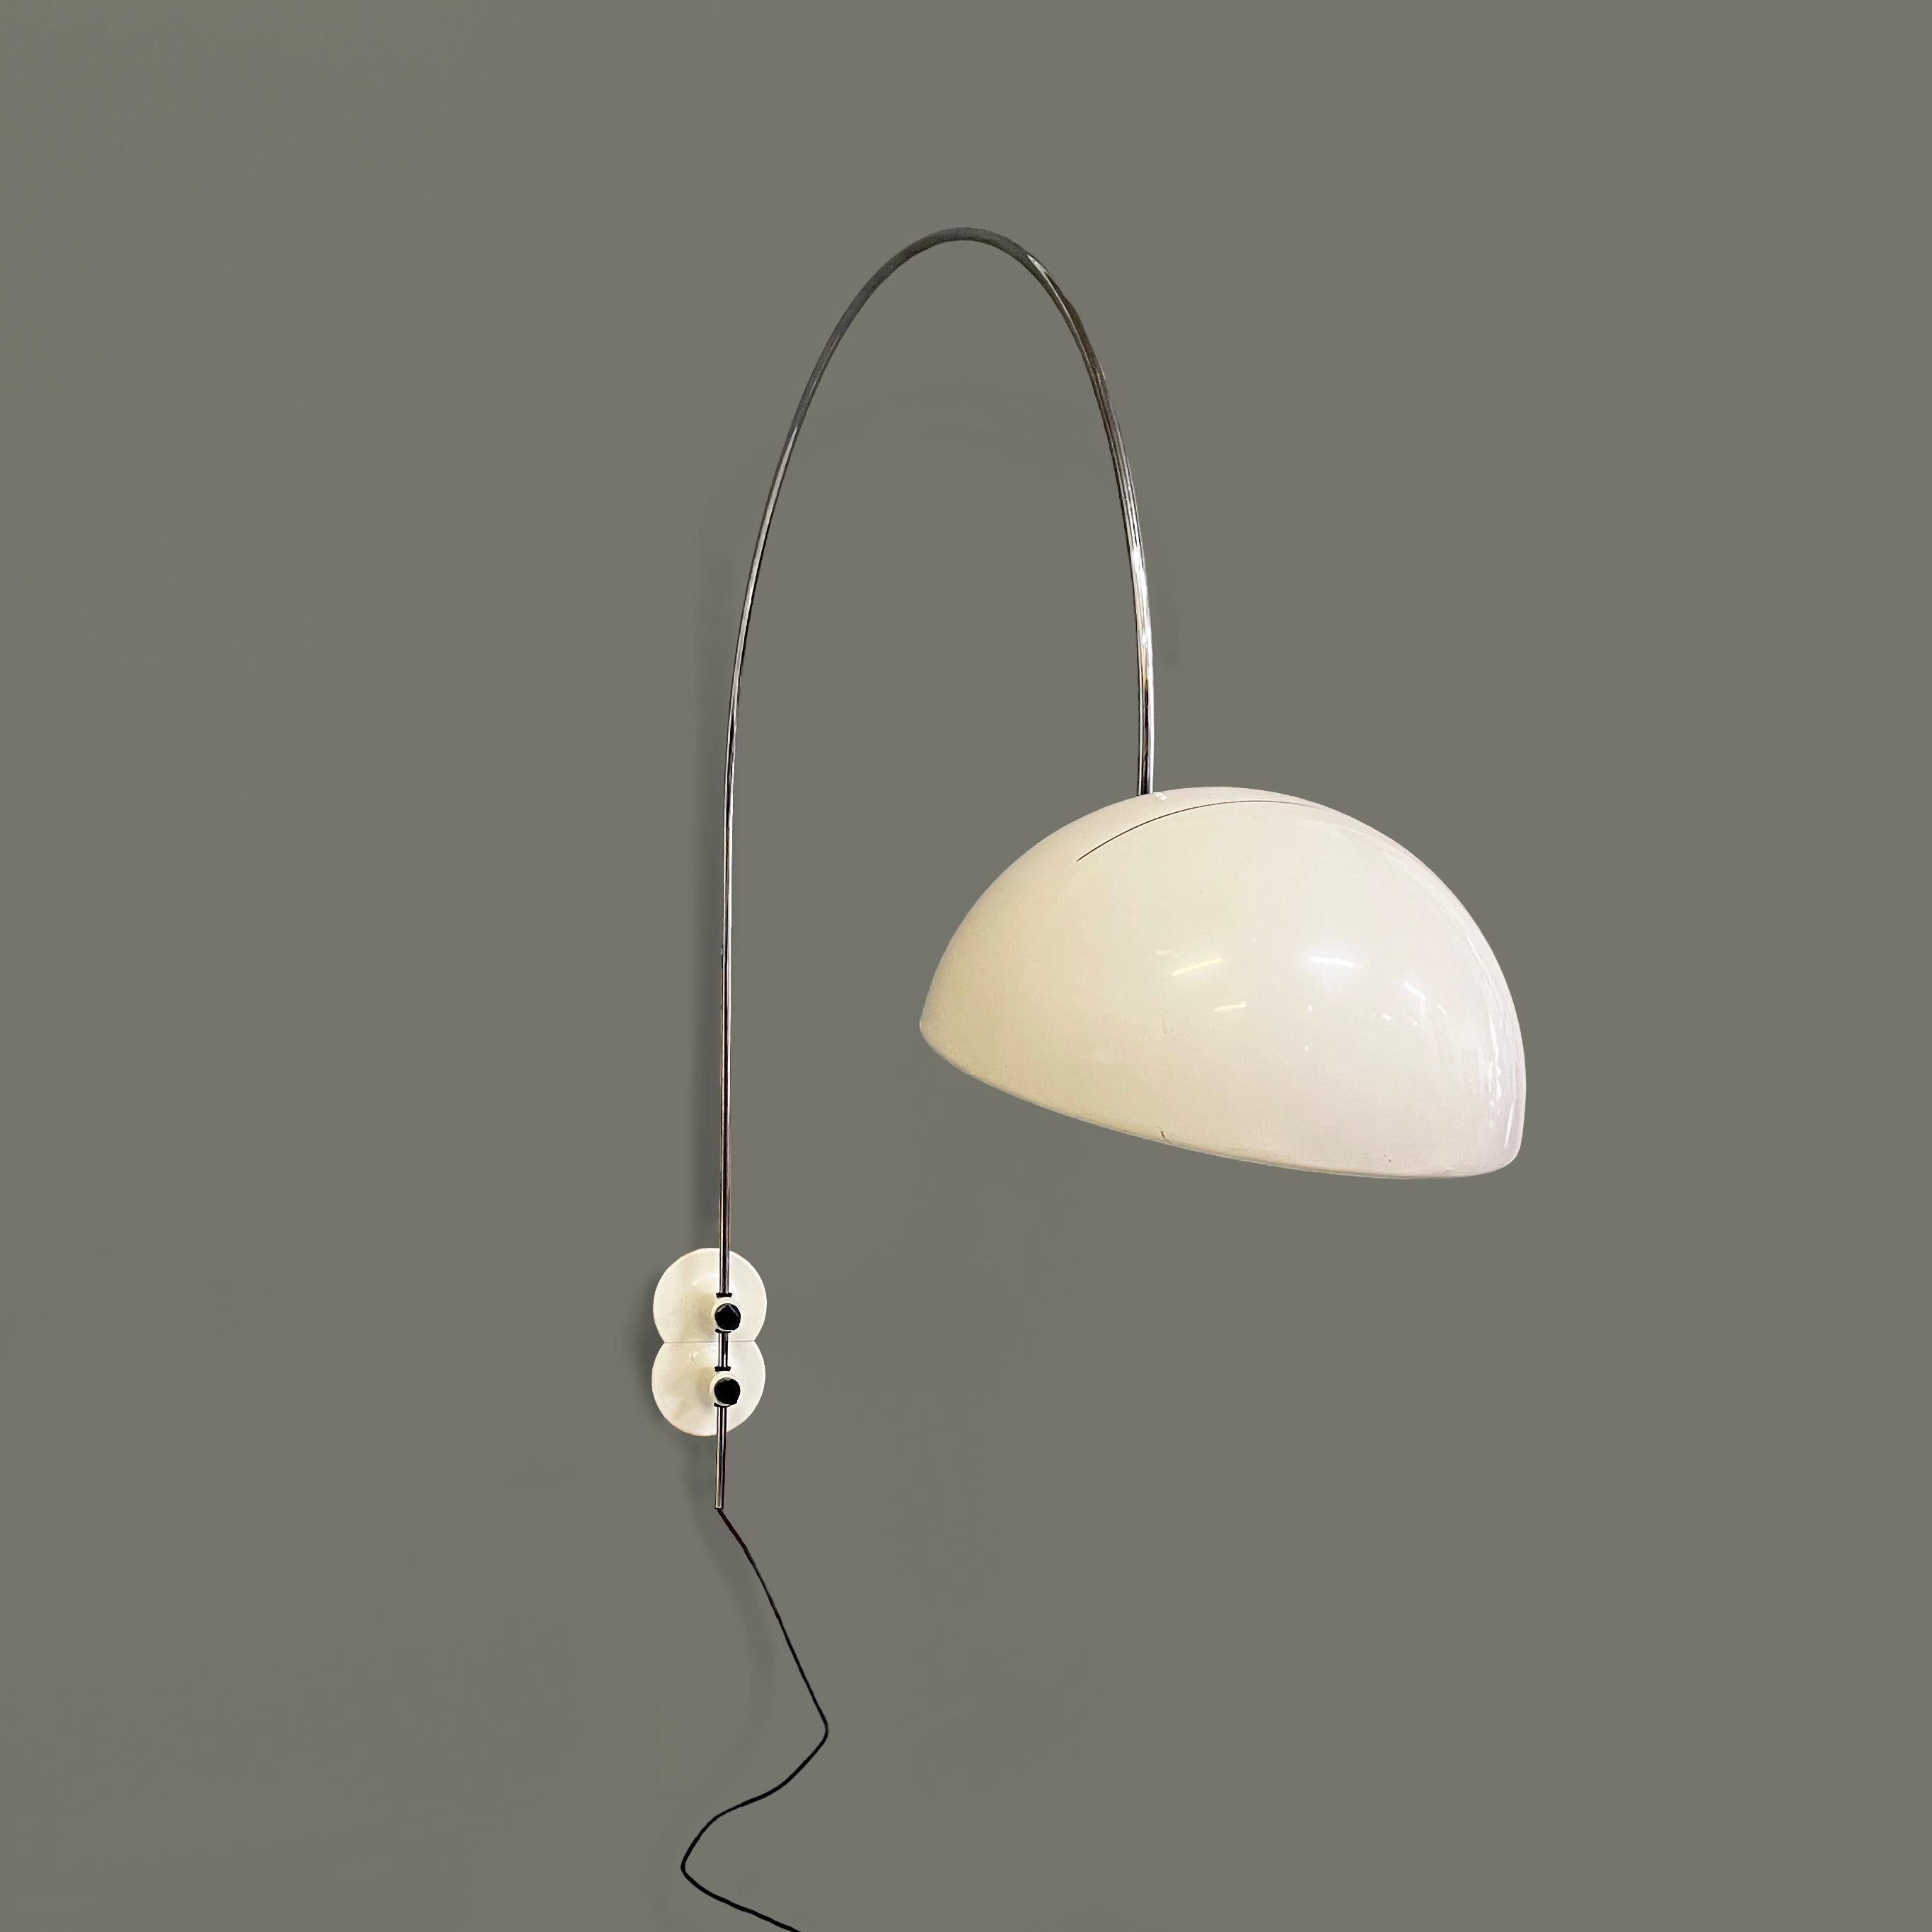 Italian modern Adjustable wall lamp Coupé 1159 by Joe Colombo for O-Luce, 1970s
Wall lamp mod. Coupé 1159 with adjustable dome lampshade in white lacquered metal. Inside the lampshade there is the switch. The arched adjustable structure is made of